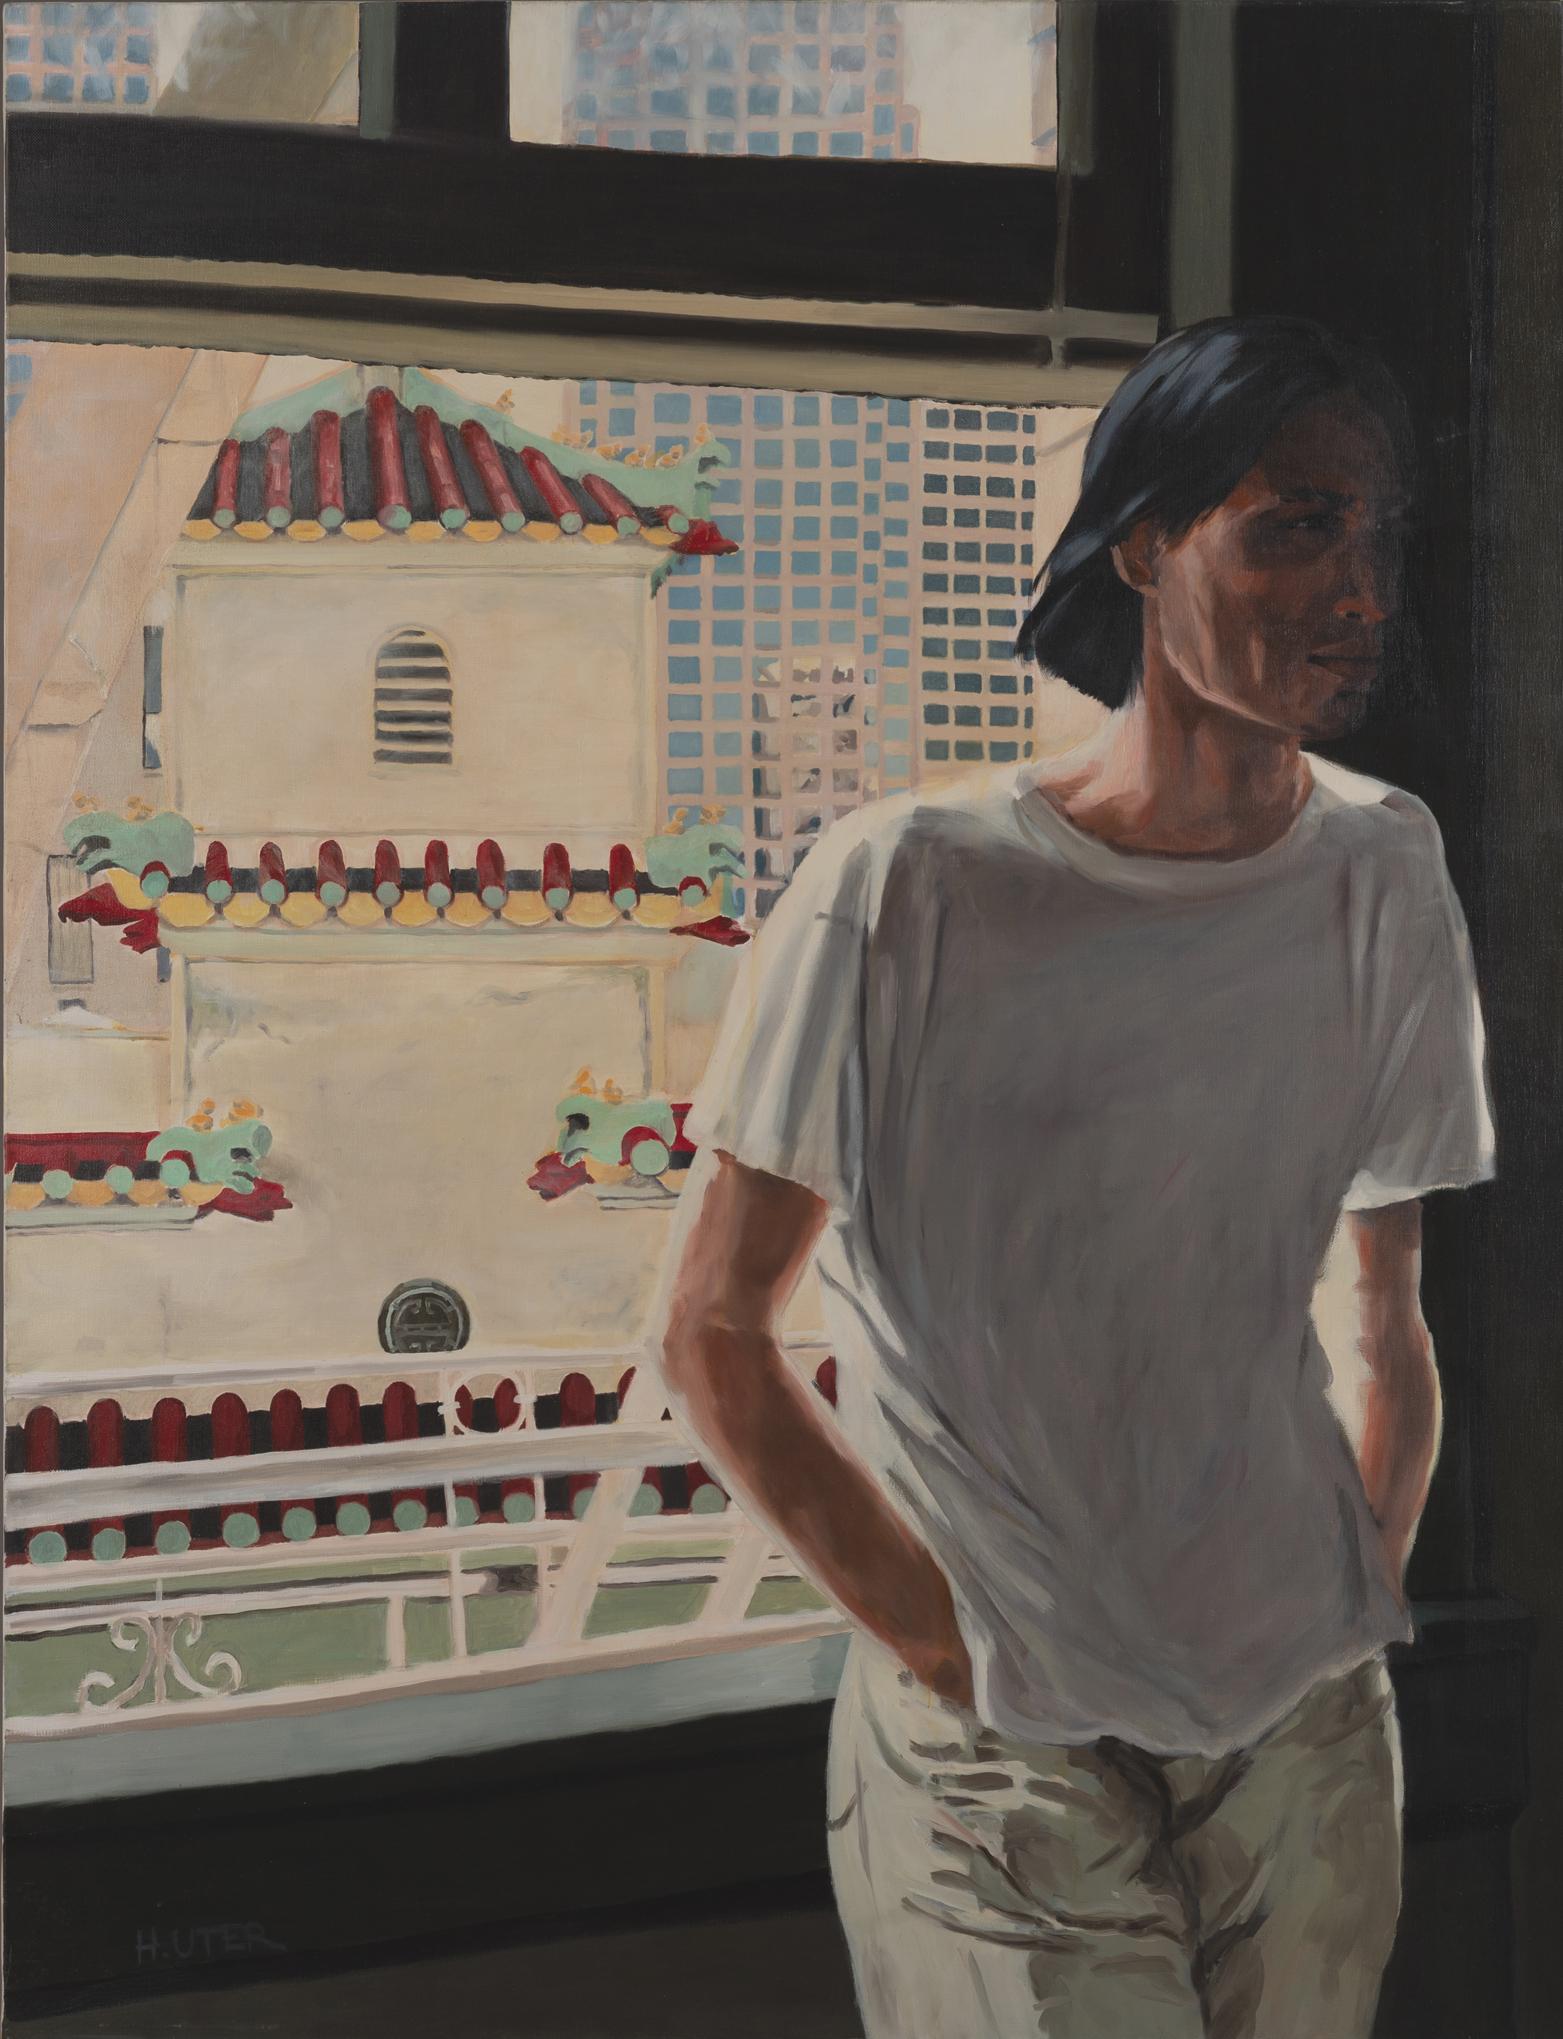 Oil on canvas 


Helen Uter is an established Franco-American painter born in 1955 who lives and works in Donnery, near Orléans, France. Heavily influenced by Edward Hopper, she creates works that explore everyday life in our current, highly